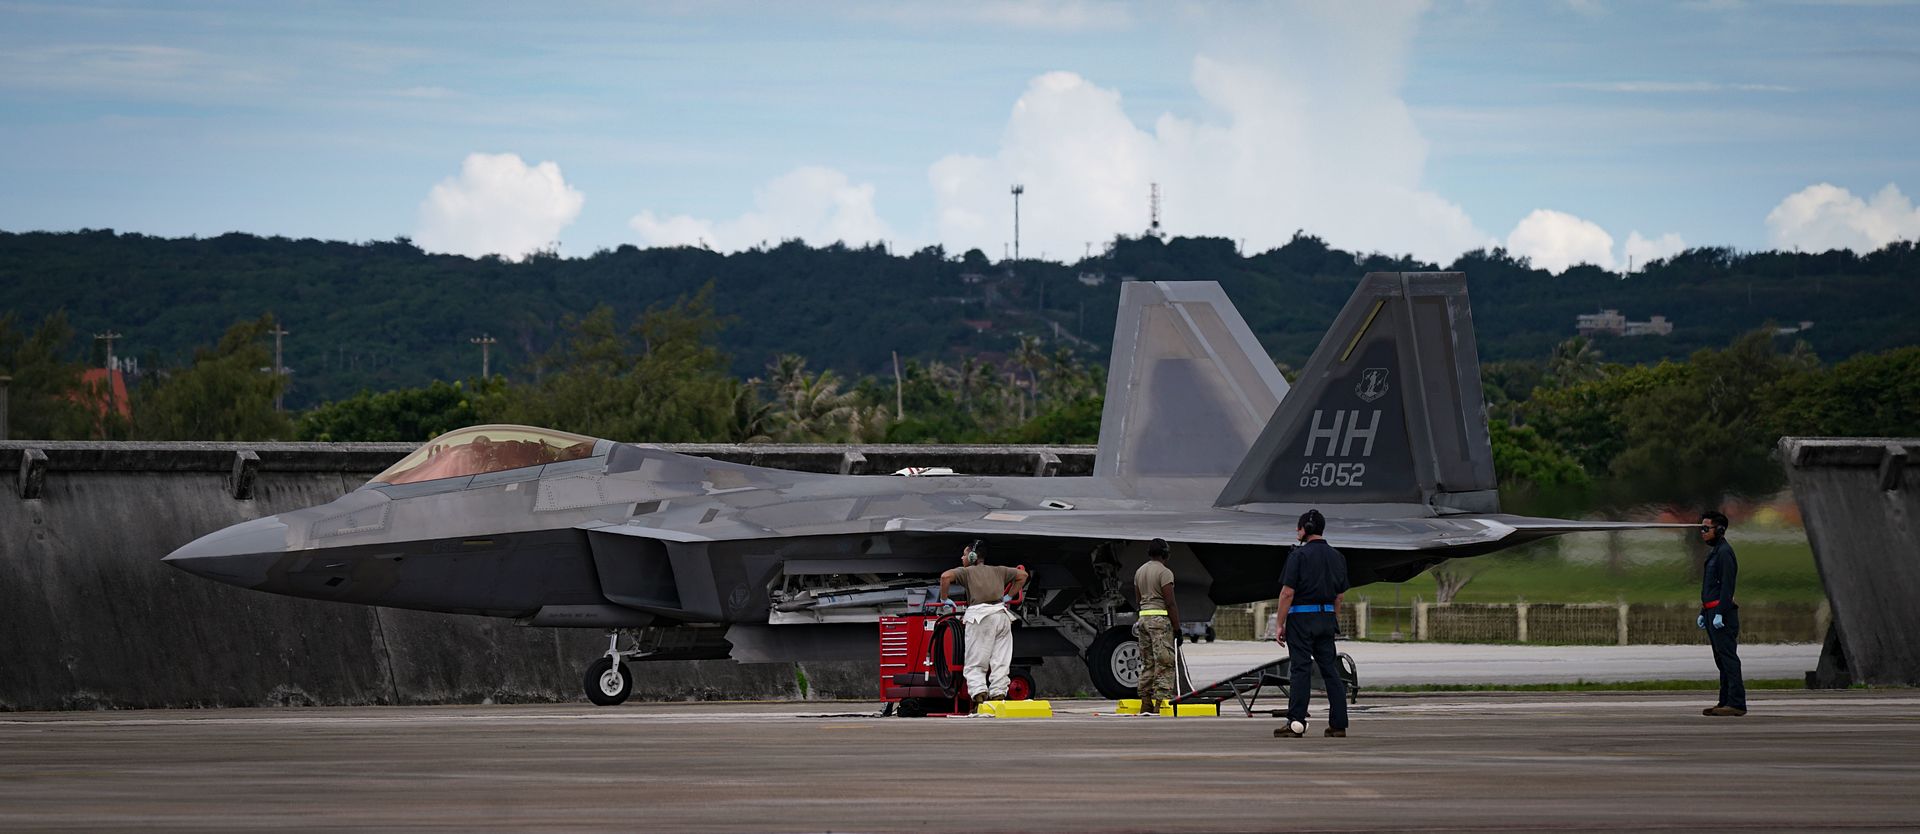 22 Raptor Assigned To The 199th Fighter Squadron 154th Wing Joint Base Pearl Harbor Hickam Hawaii Arrives In Support Of Pacific Iron 2021 At Andersen Air Force Base Guam July 18 2021